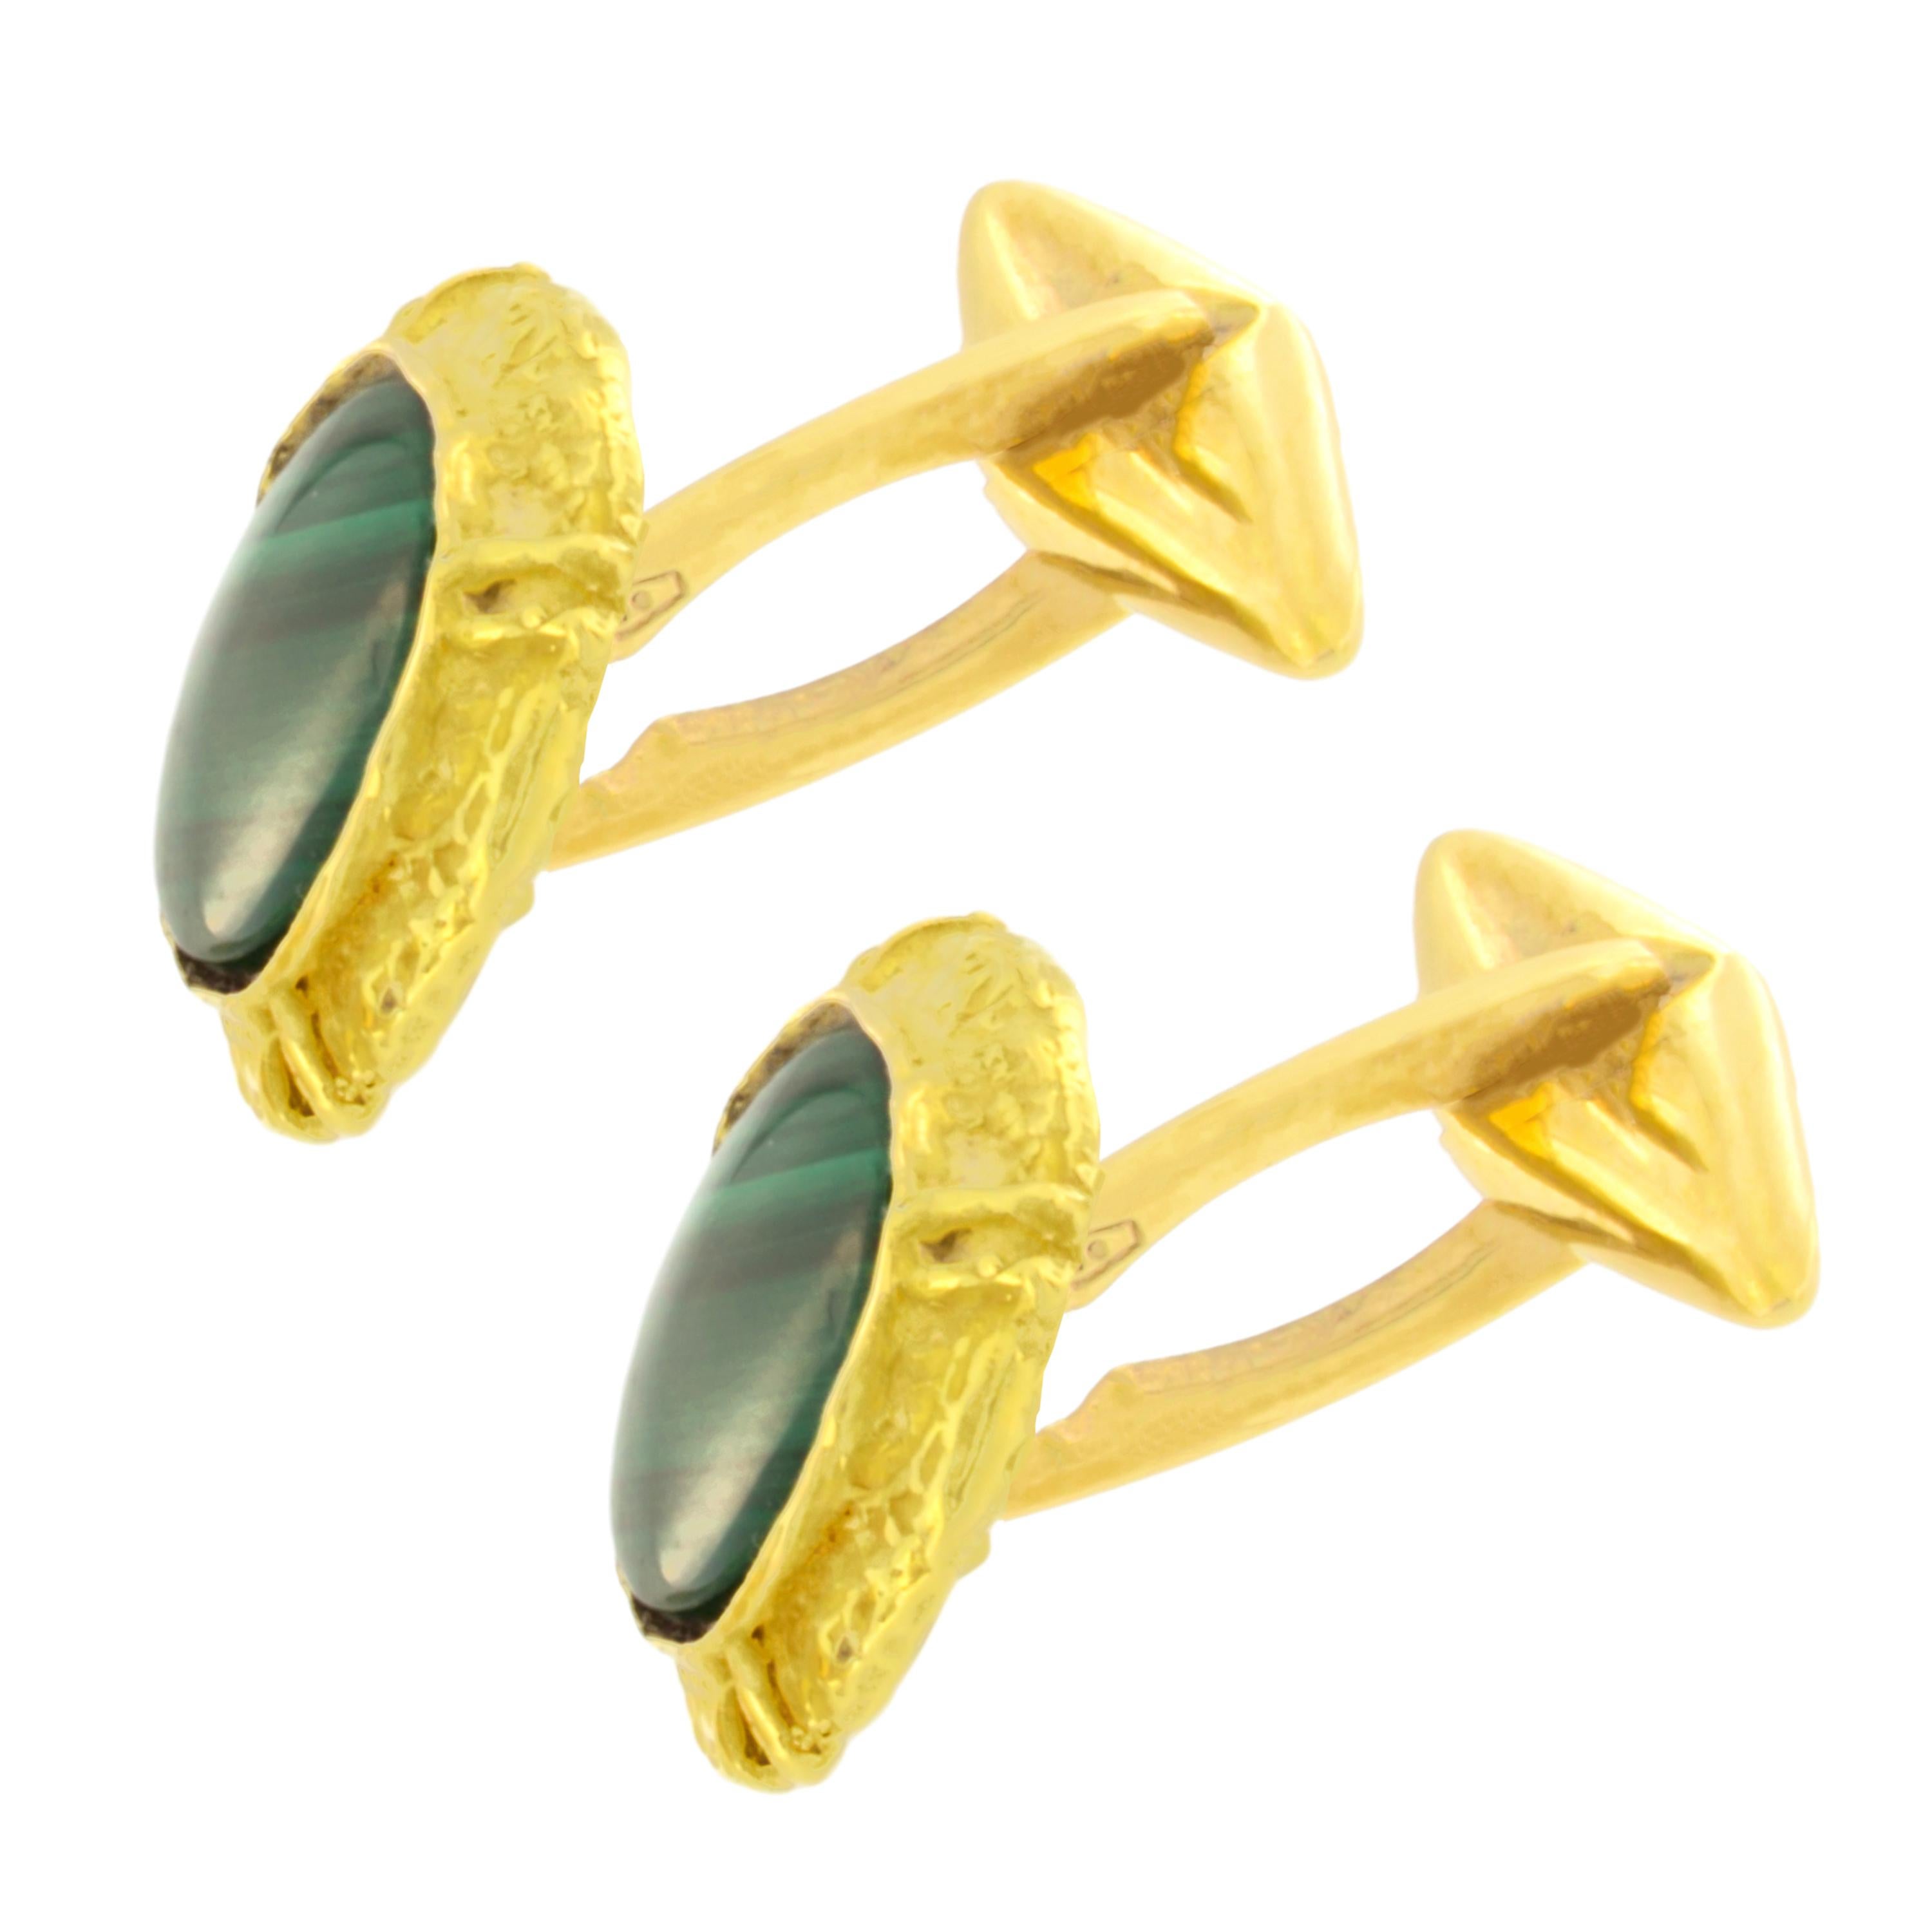 Malachite Gemstone Satin Yellow Gold Oval Cufflinks hand-crafted with lost-wax casting technique.

Lost-wax casting, one of the oldest techniques for creating jewellery, forms the basis of Sacchi's jewellery production. Modelling wax in the round